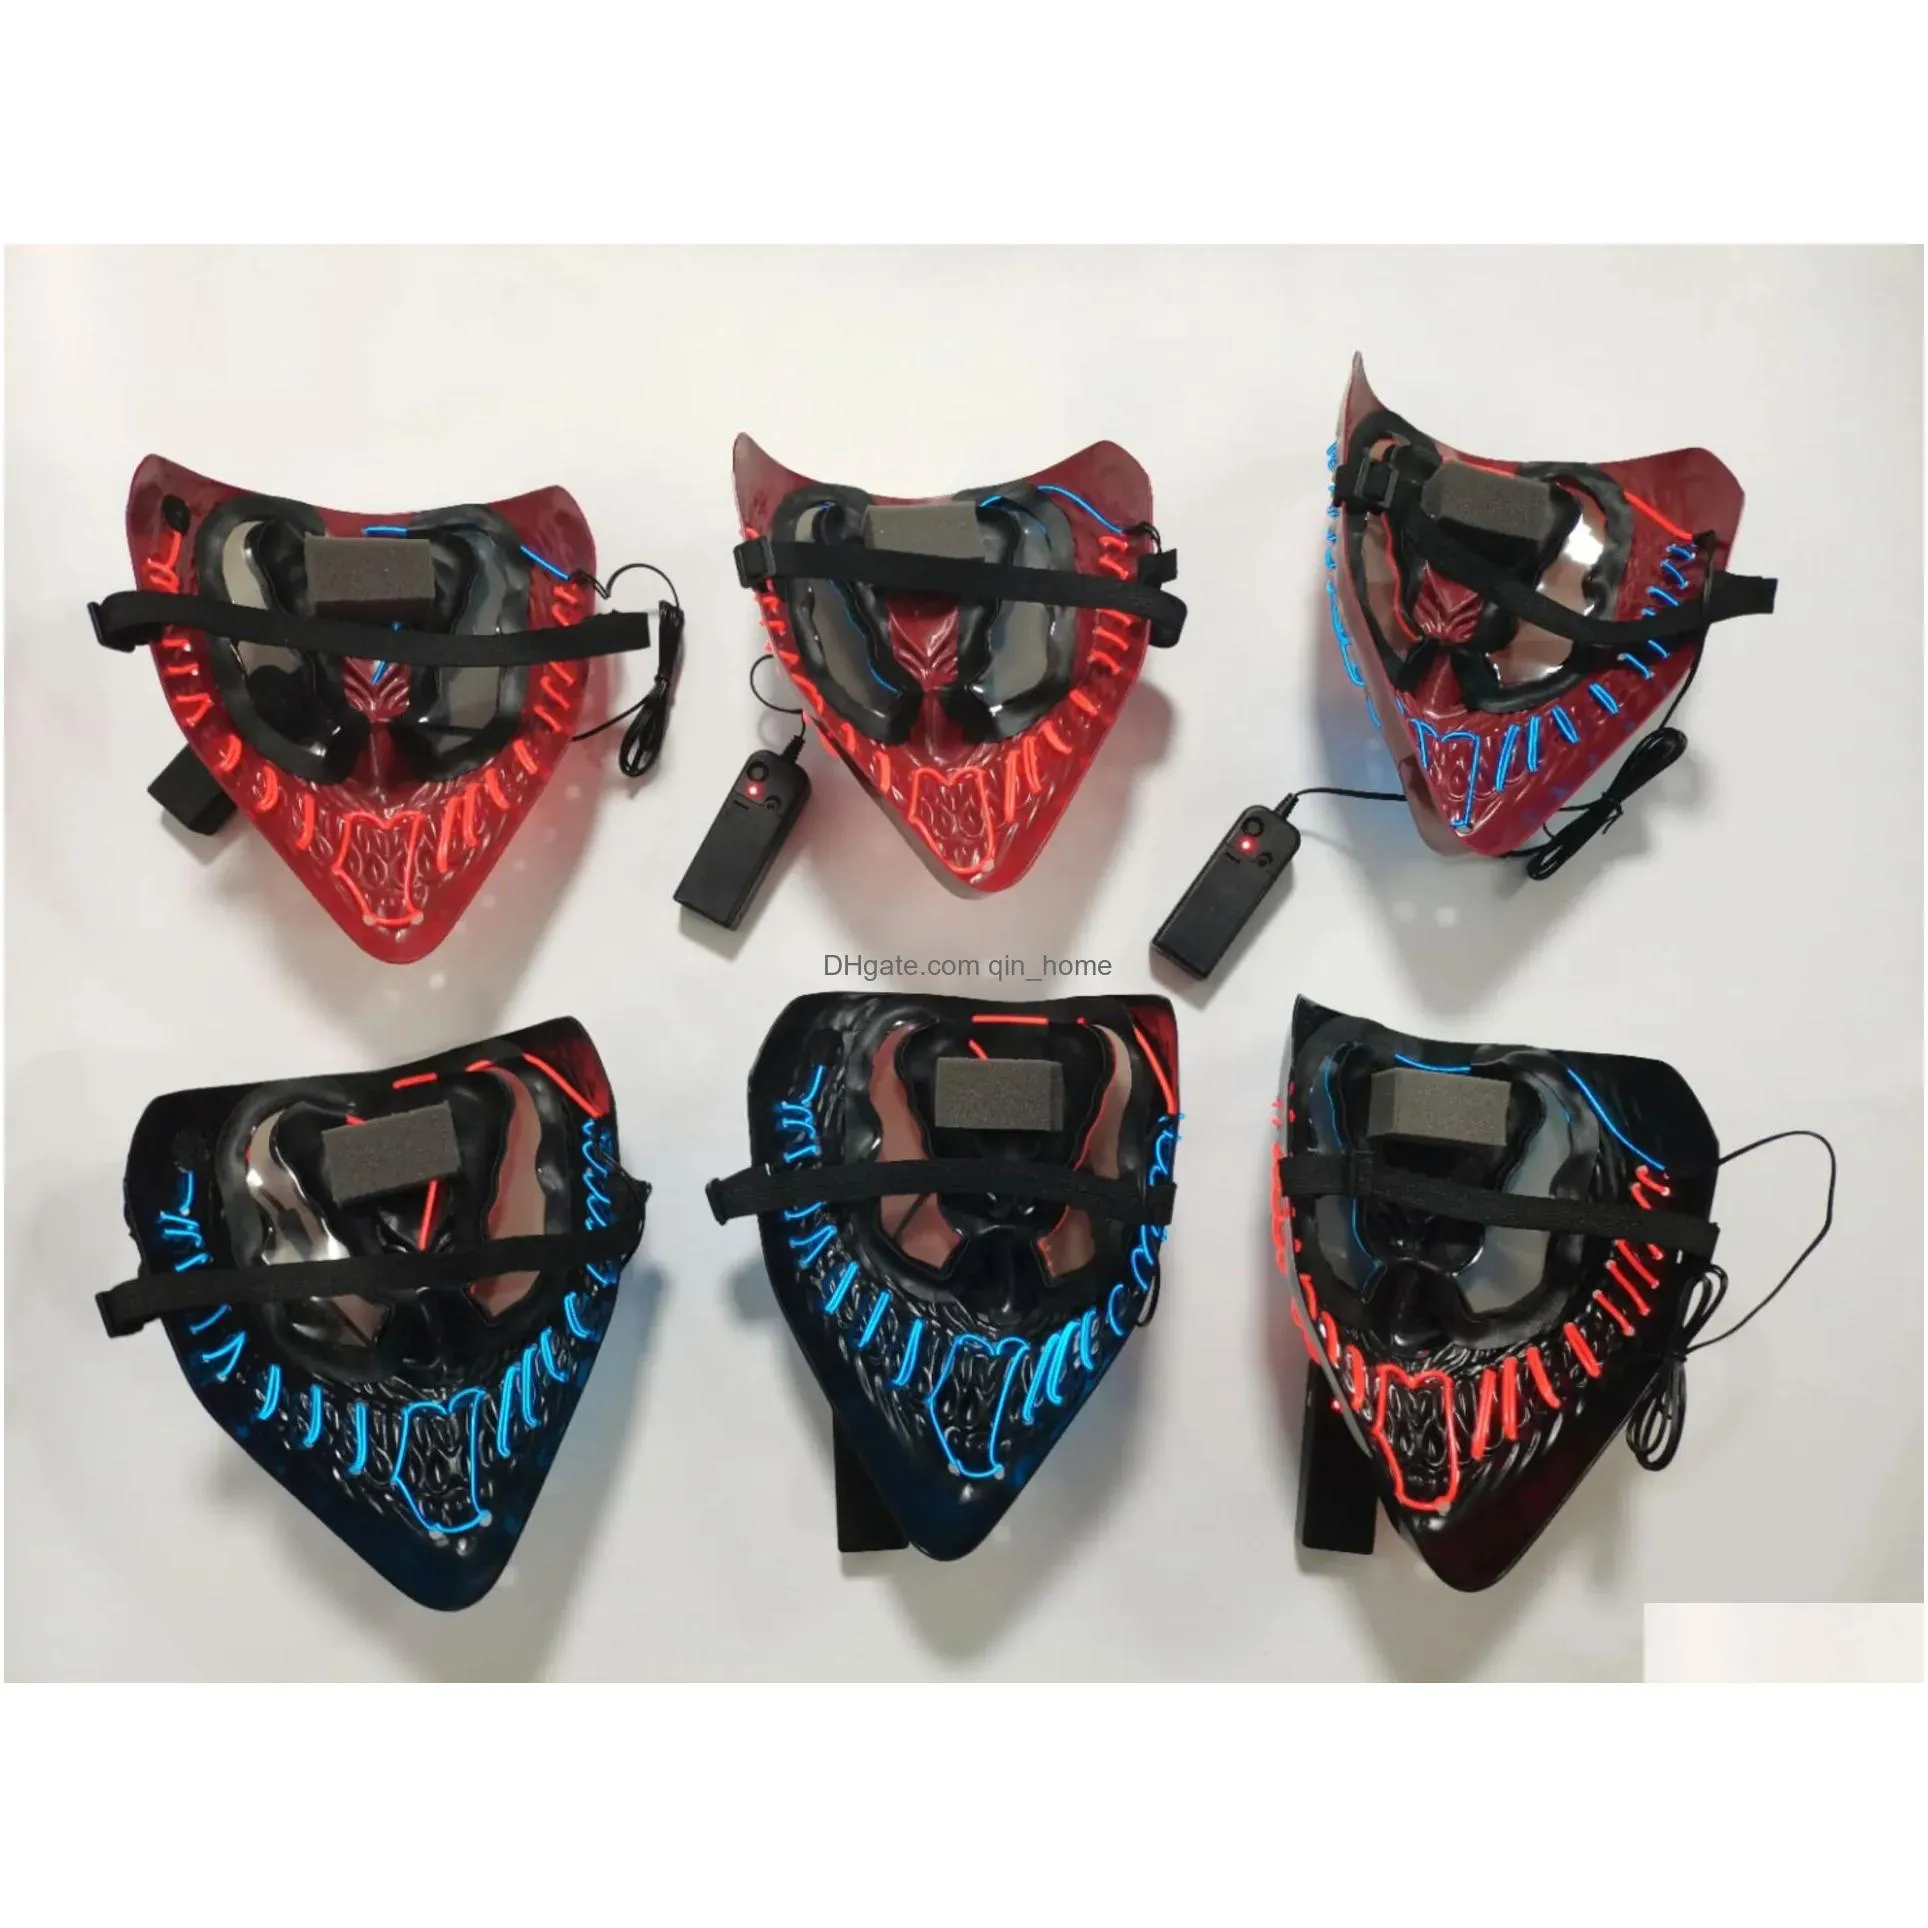 halloween party masks led light up mask for adults kids unique neon glow masks with dark and evil glowing eyes 